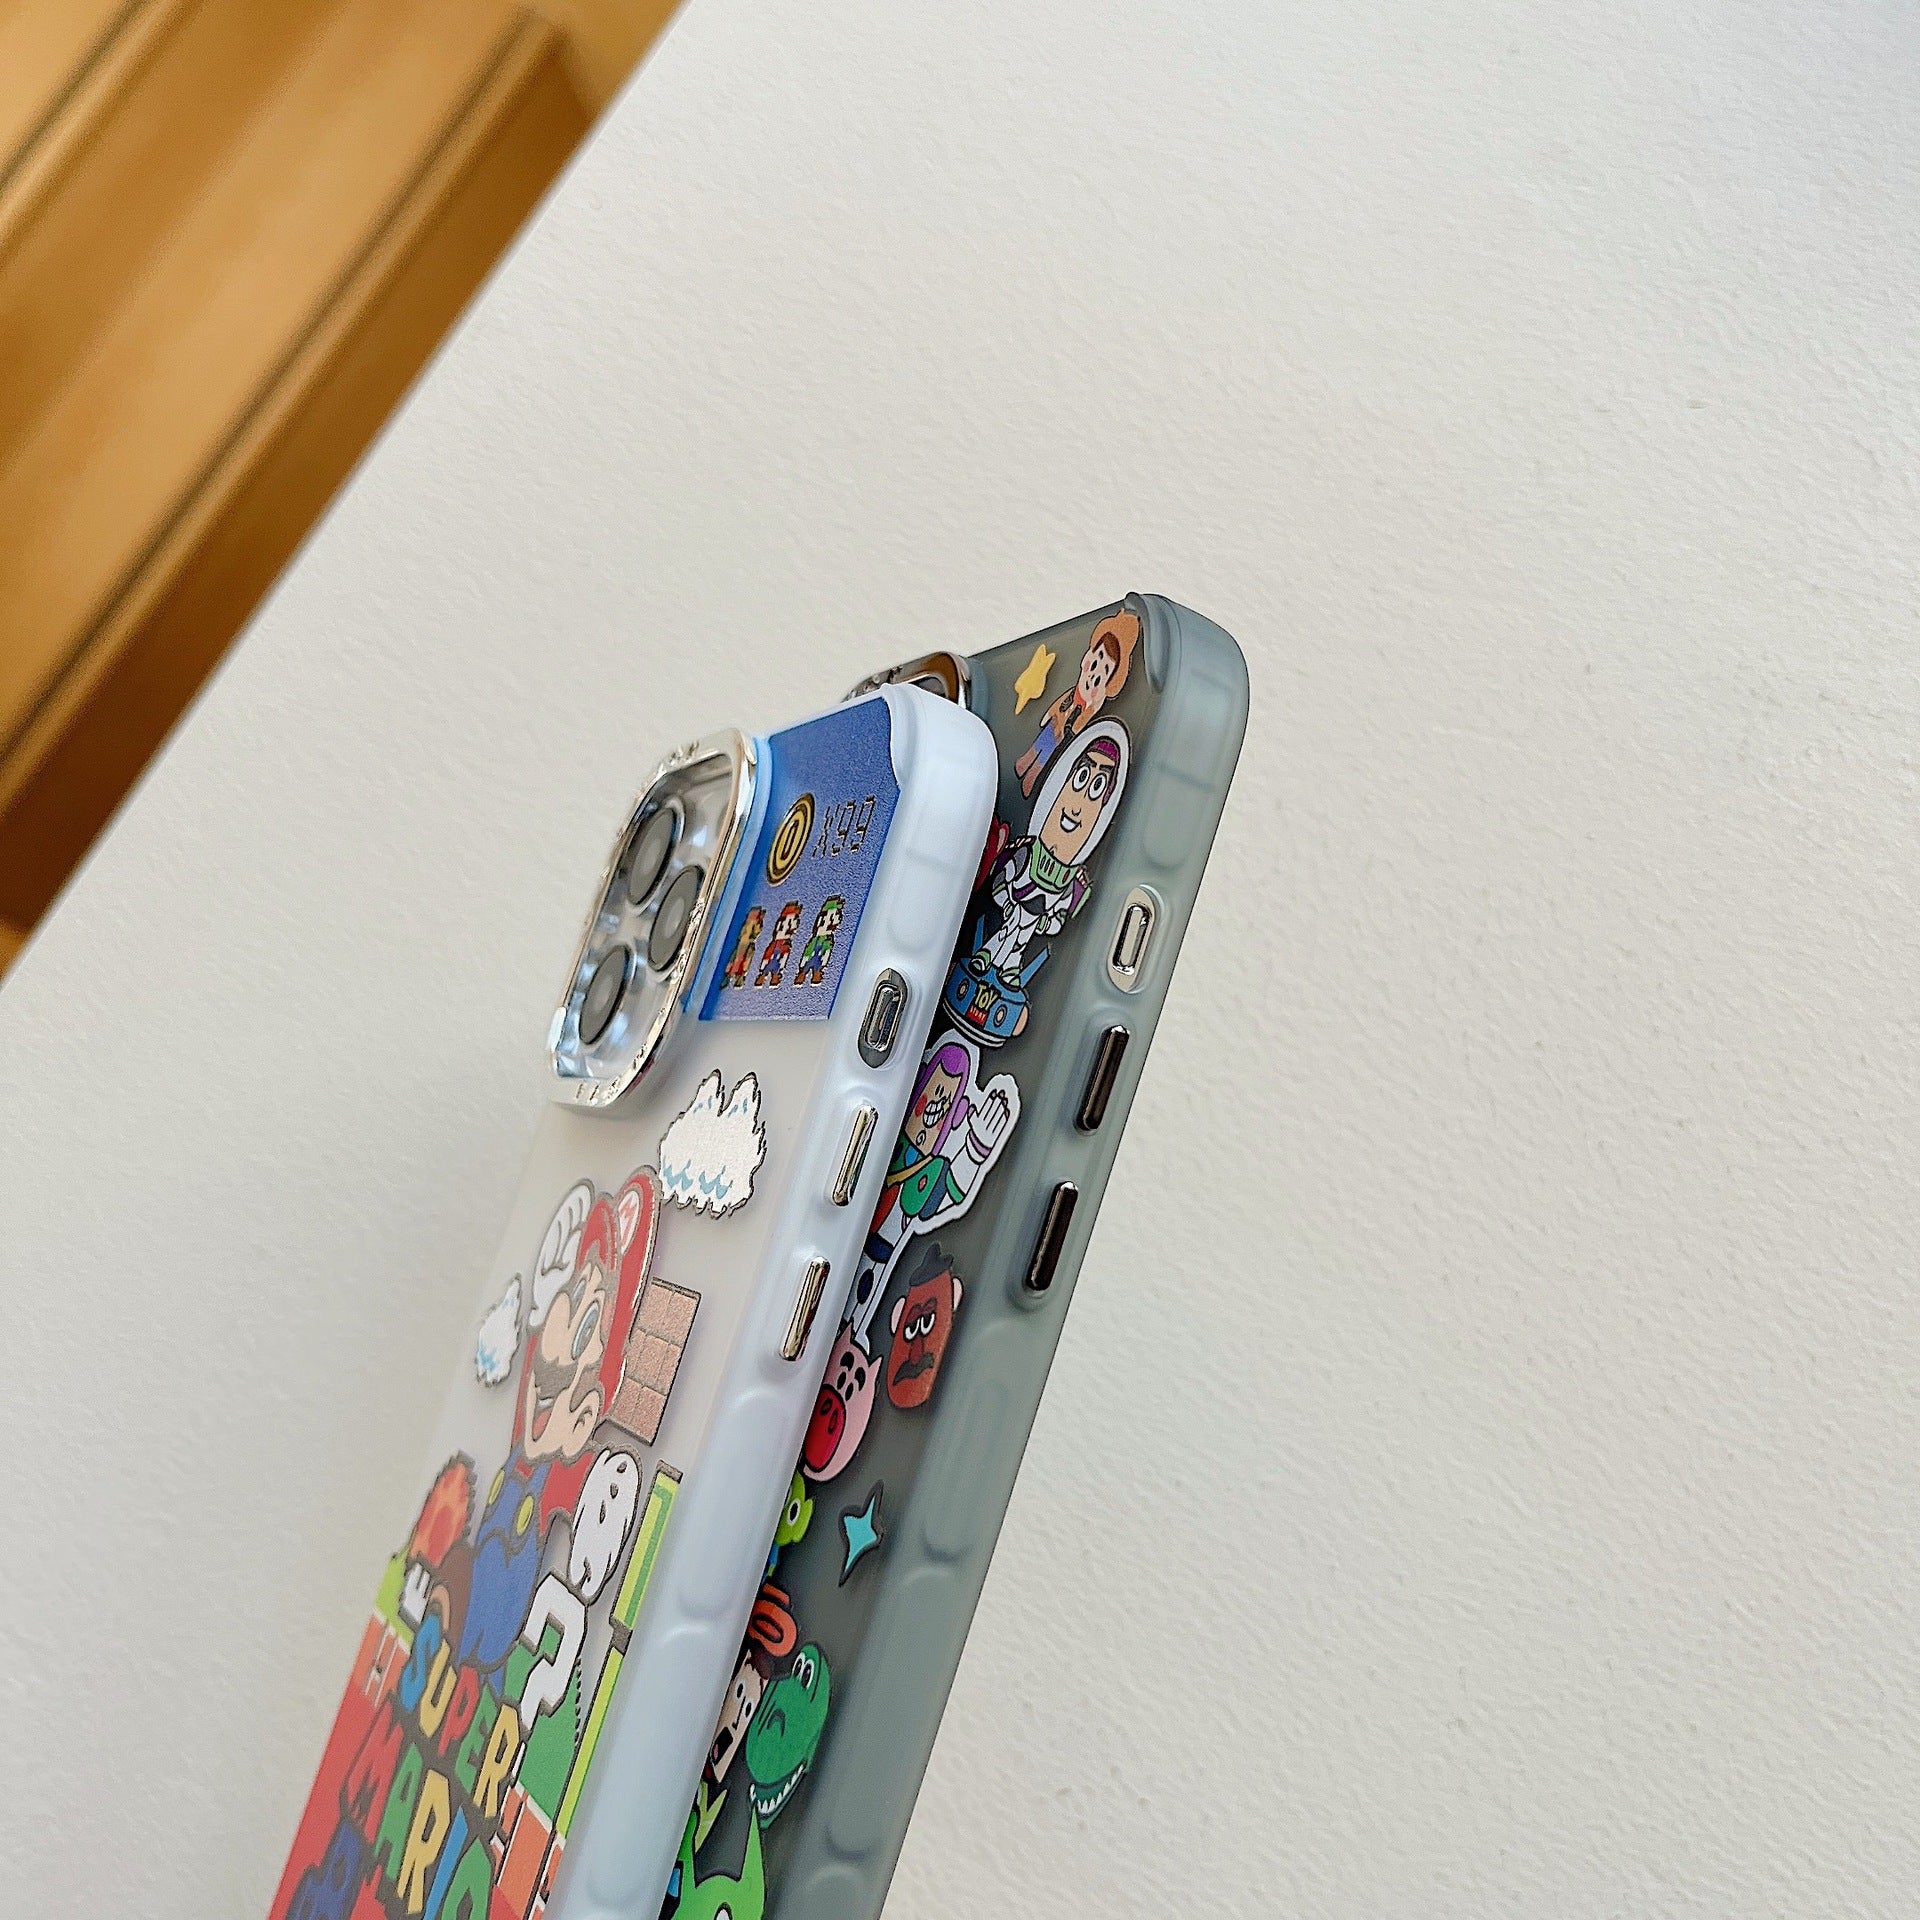 Super Mario × Toy Story iphone Case